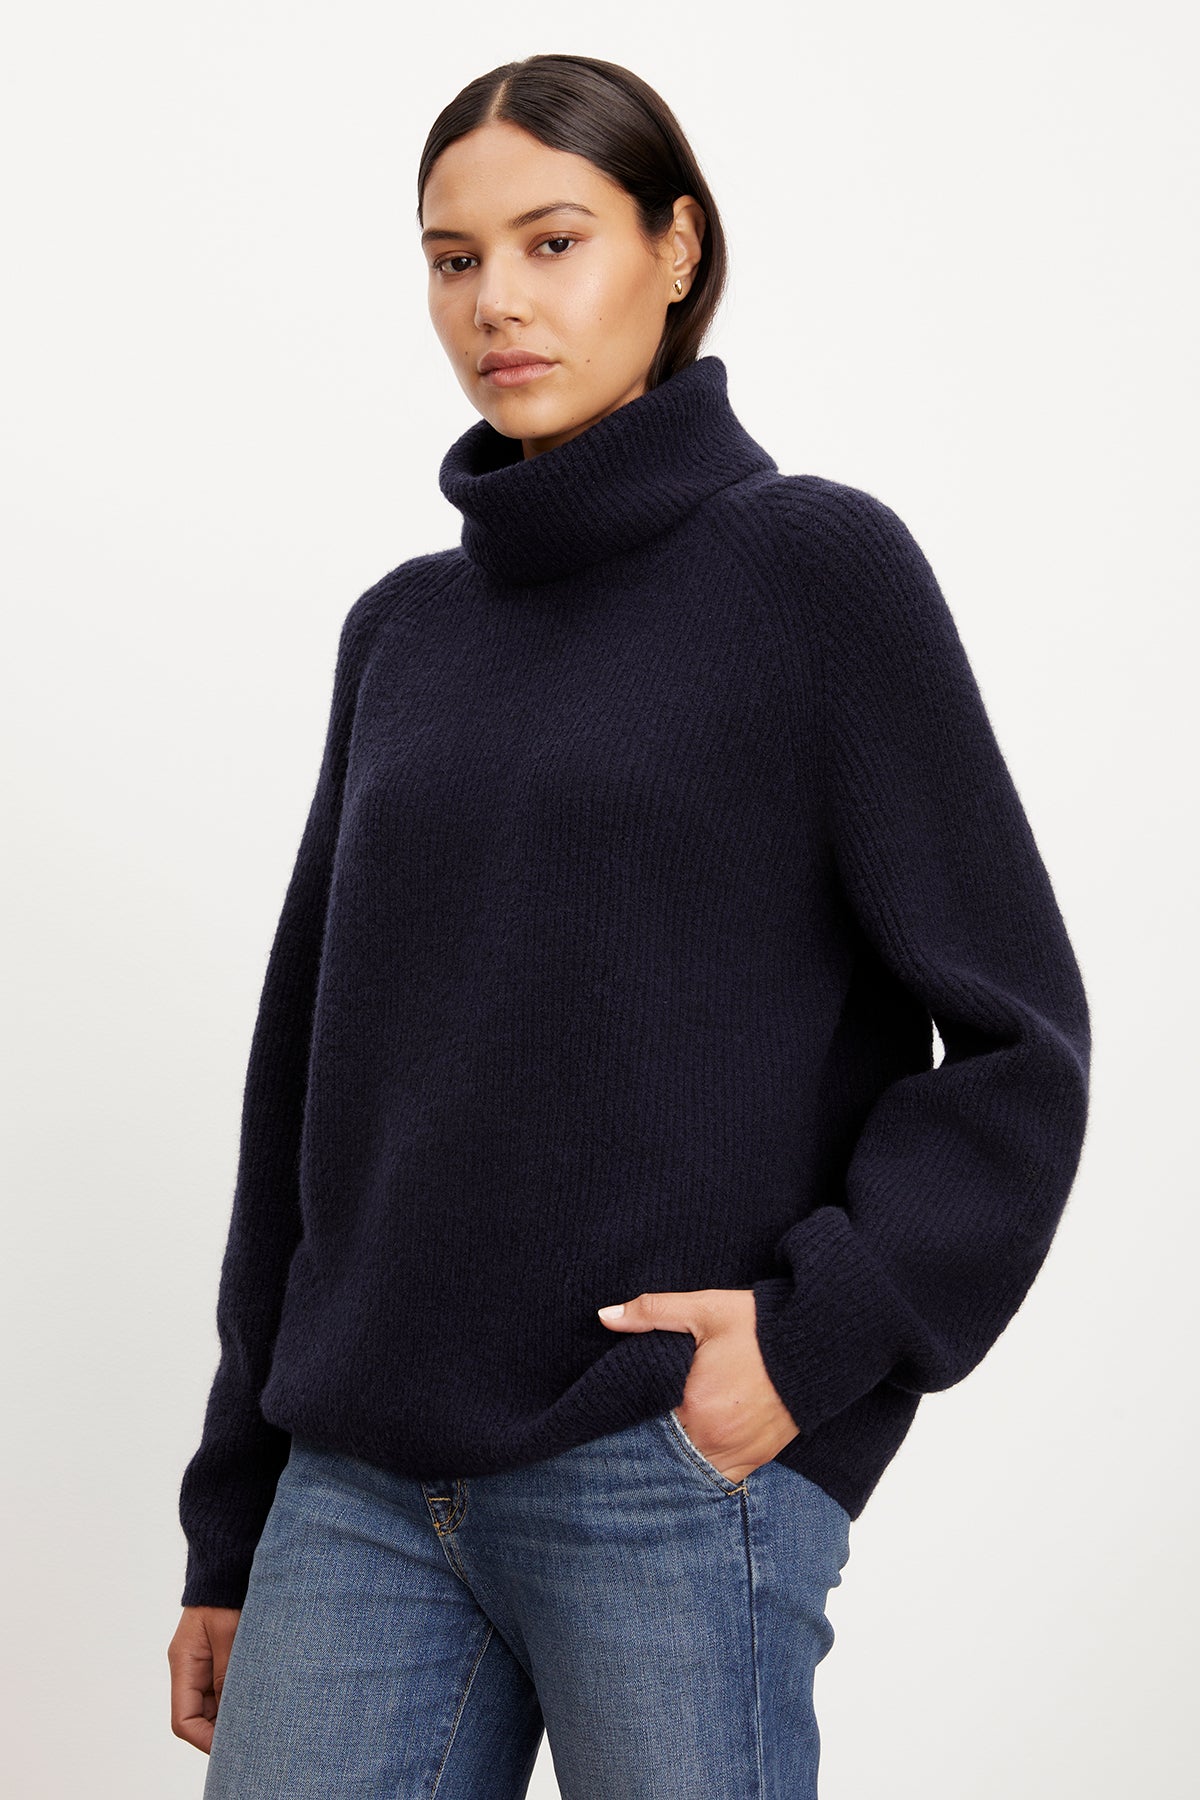 A model wearing a cozy Velvet by Graham & Spencer JUDITH turtleneck sweater and jeans.-35577840402625